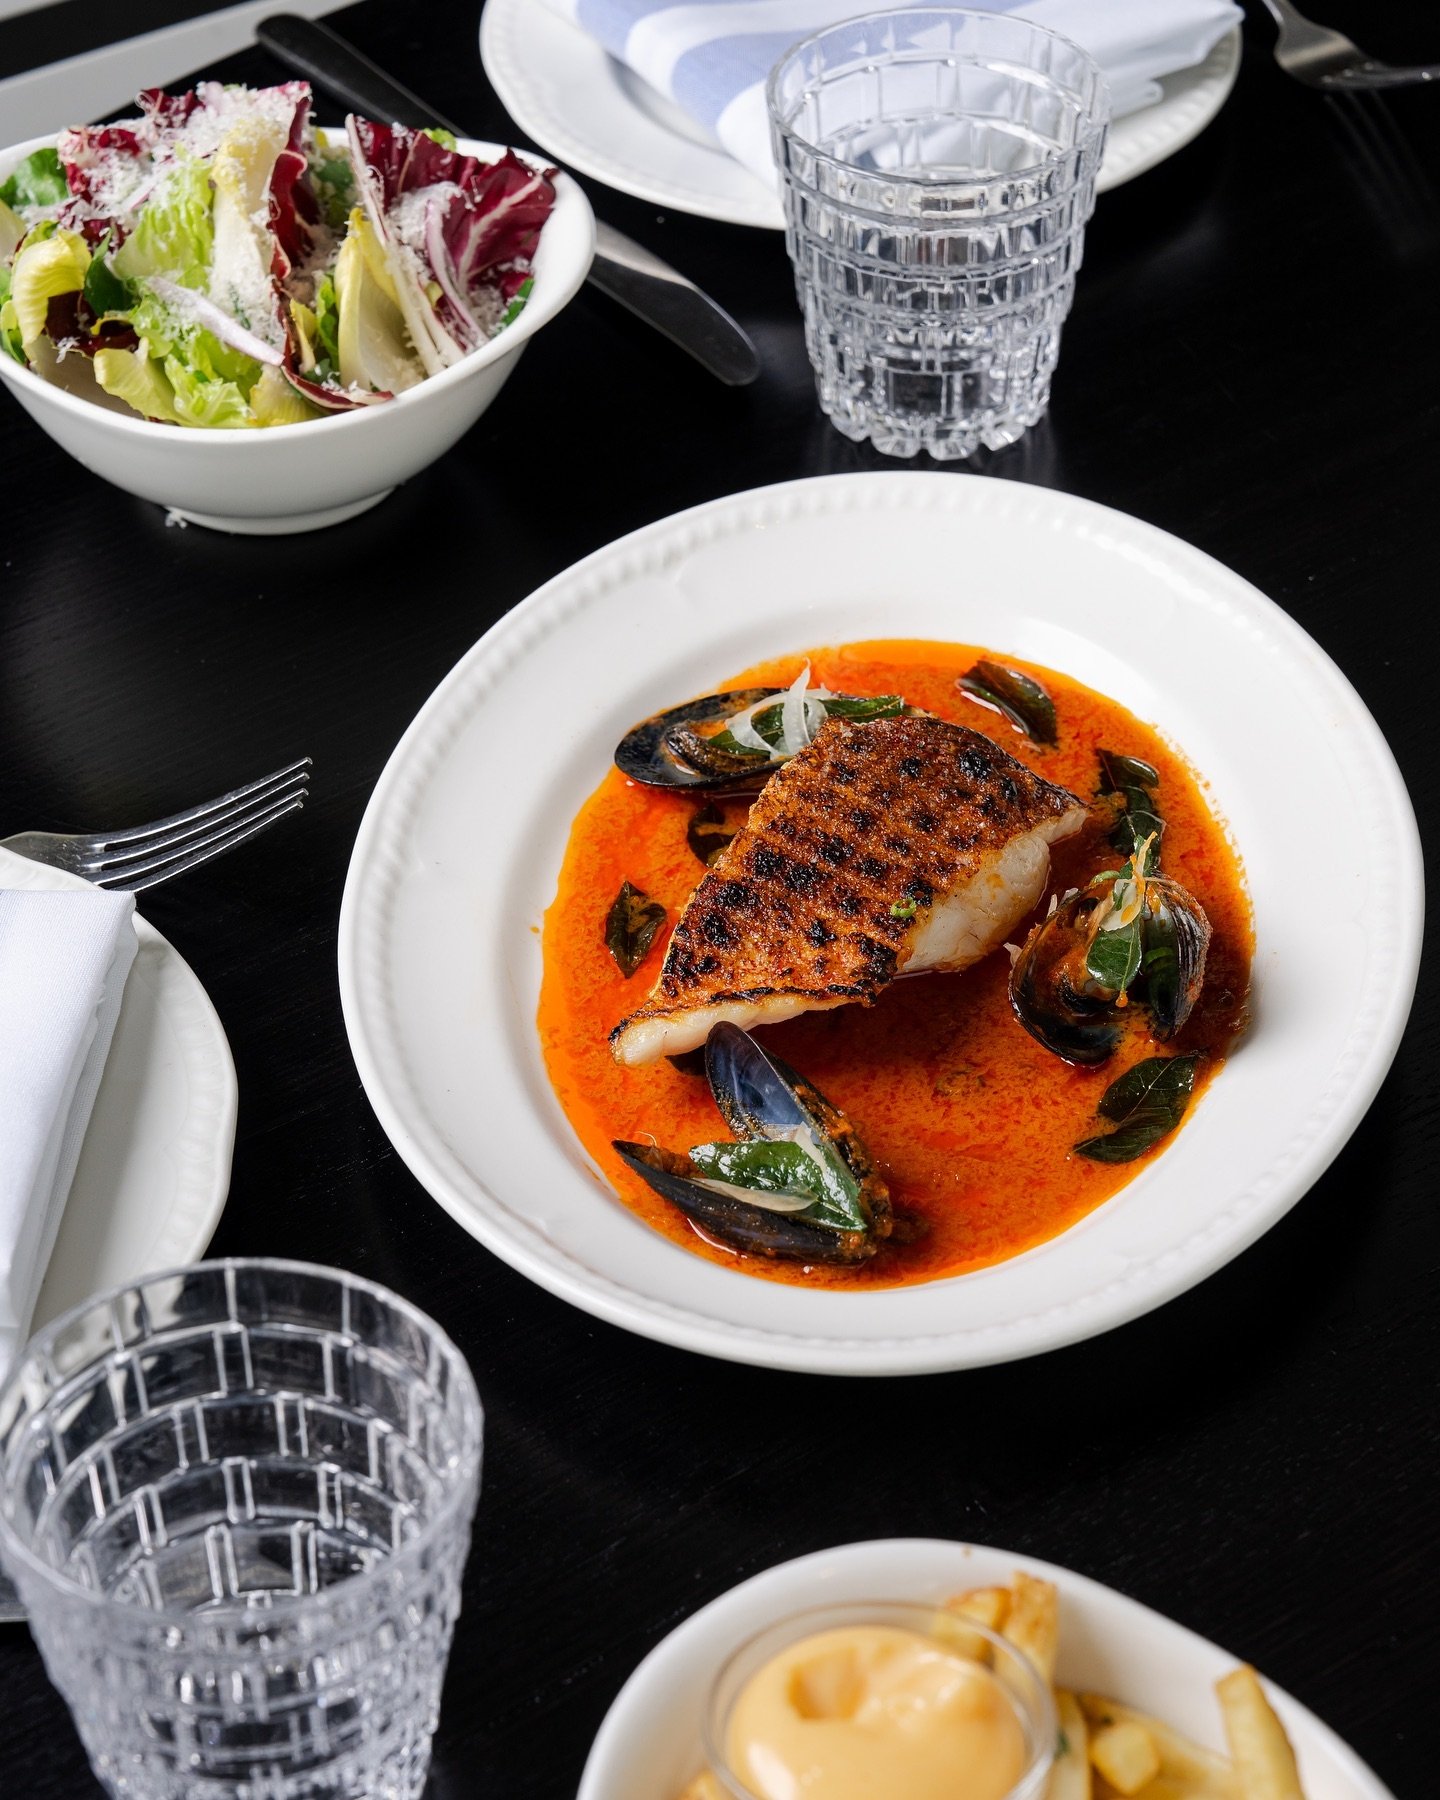 Singapore-style aged corral trout with mussels ~ bursting with flavour.

www.foshportside.com.au/bookings for reservations or call us on (07) 3211 8111
Portside Wharf 3.01/39 Hercules Street, Hamilton
⁠
#thisisbrisbane #Portside #Fosh #seafood #PortS